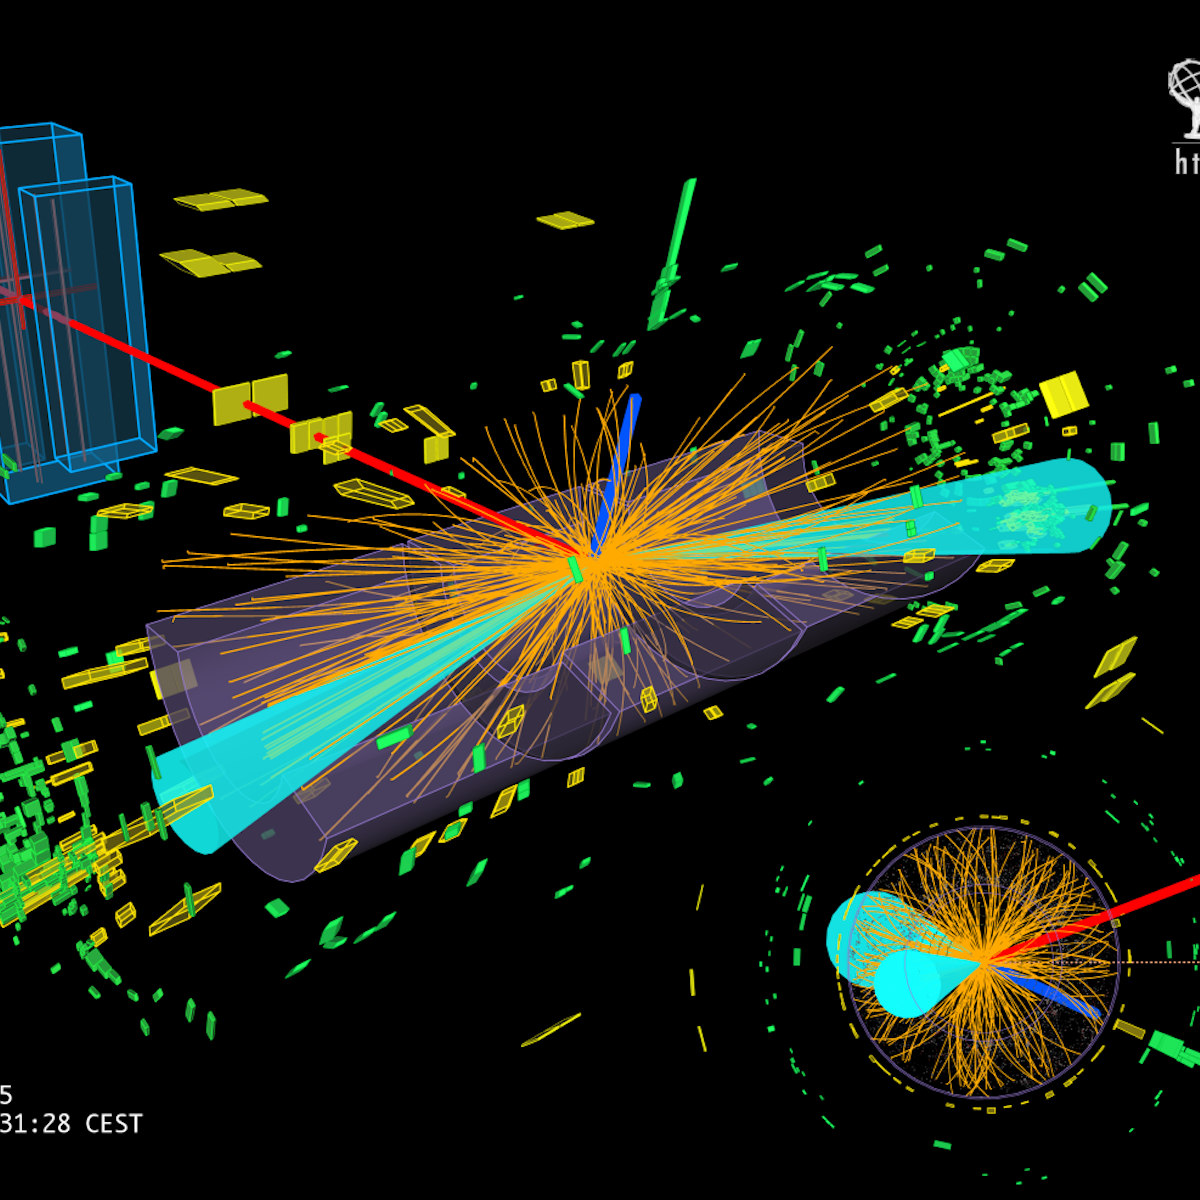 Higgs boson's decay confirms physics model works